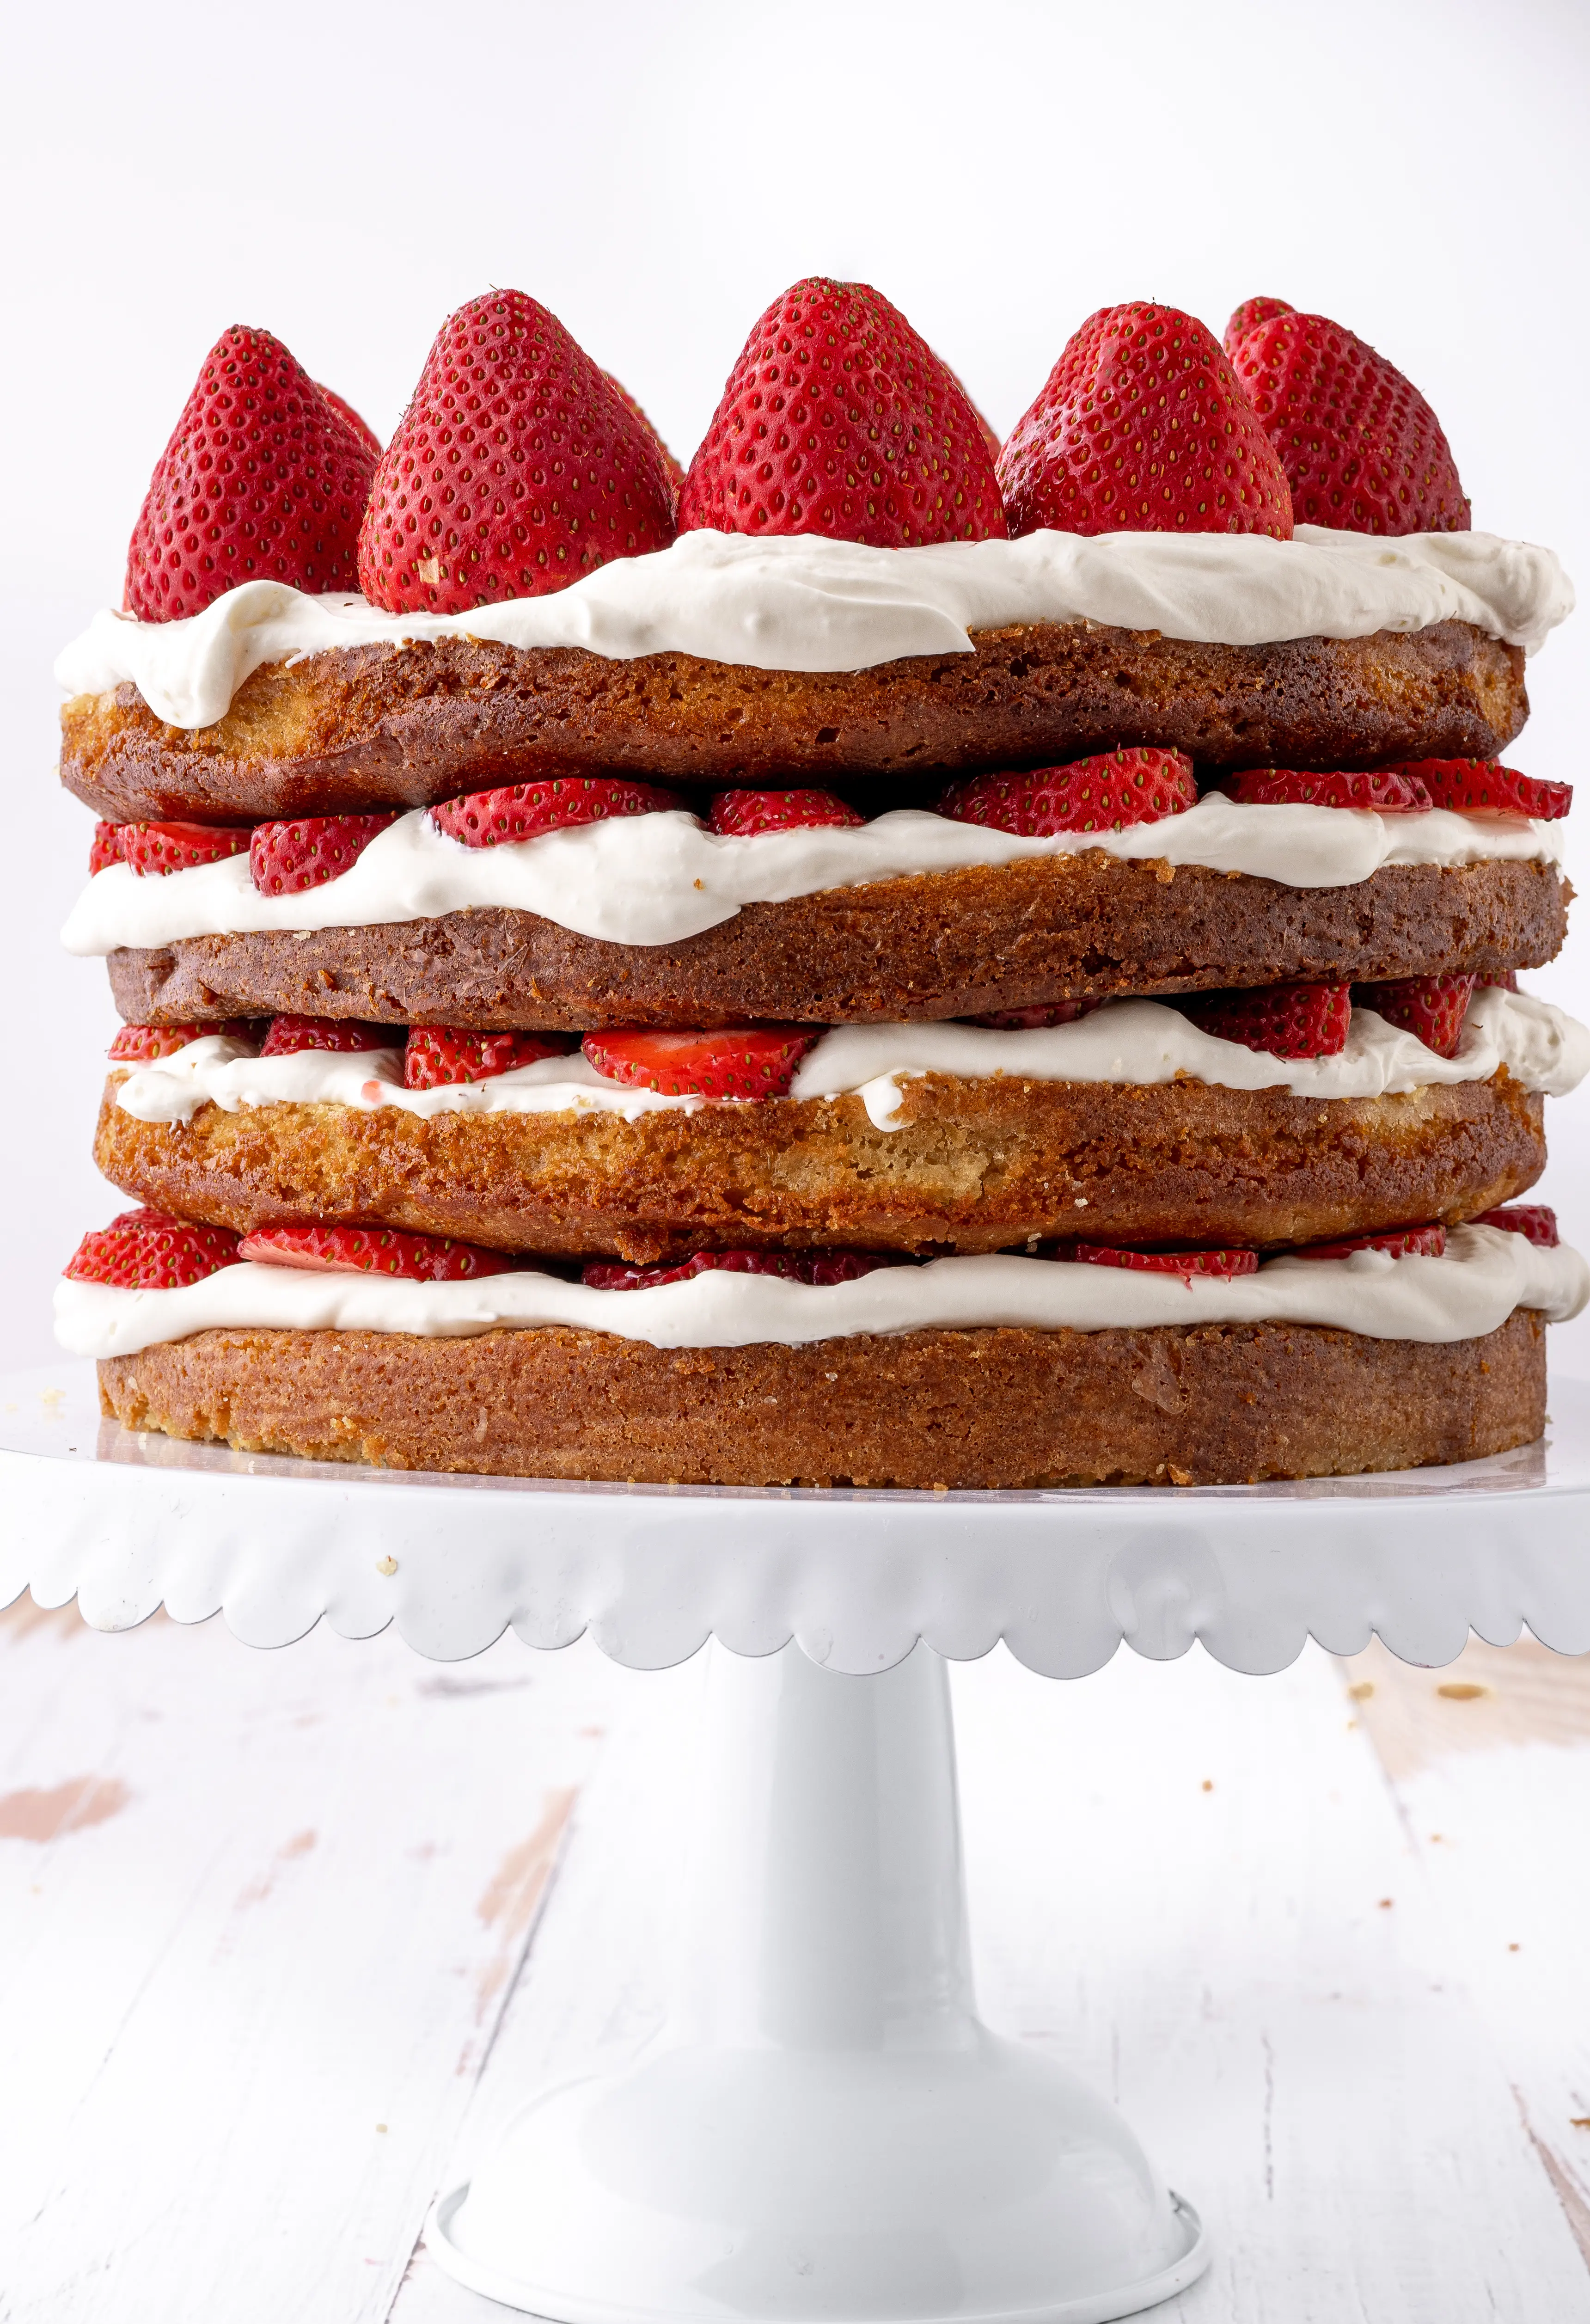 A four layer low carb strawberry shortcake  sliced with fresh strawberries and whipped cream on a white ruffled cake stand.  